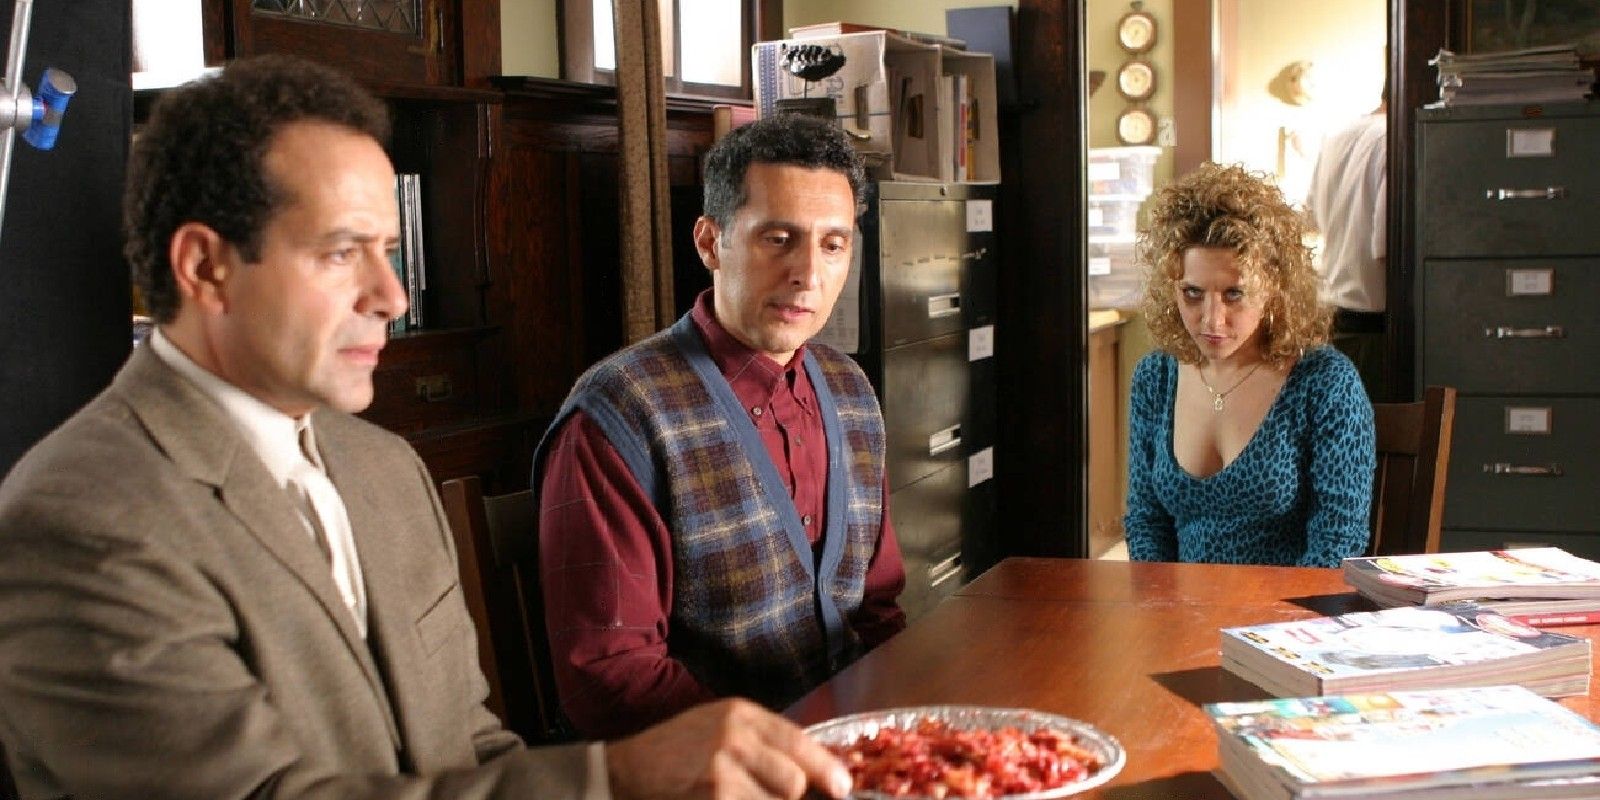 Monk and his brother with a pie in front of them while Sharona sits nearby in the series Monk